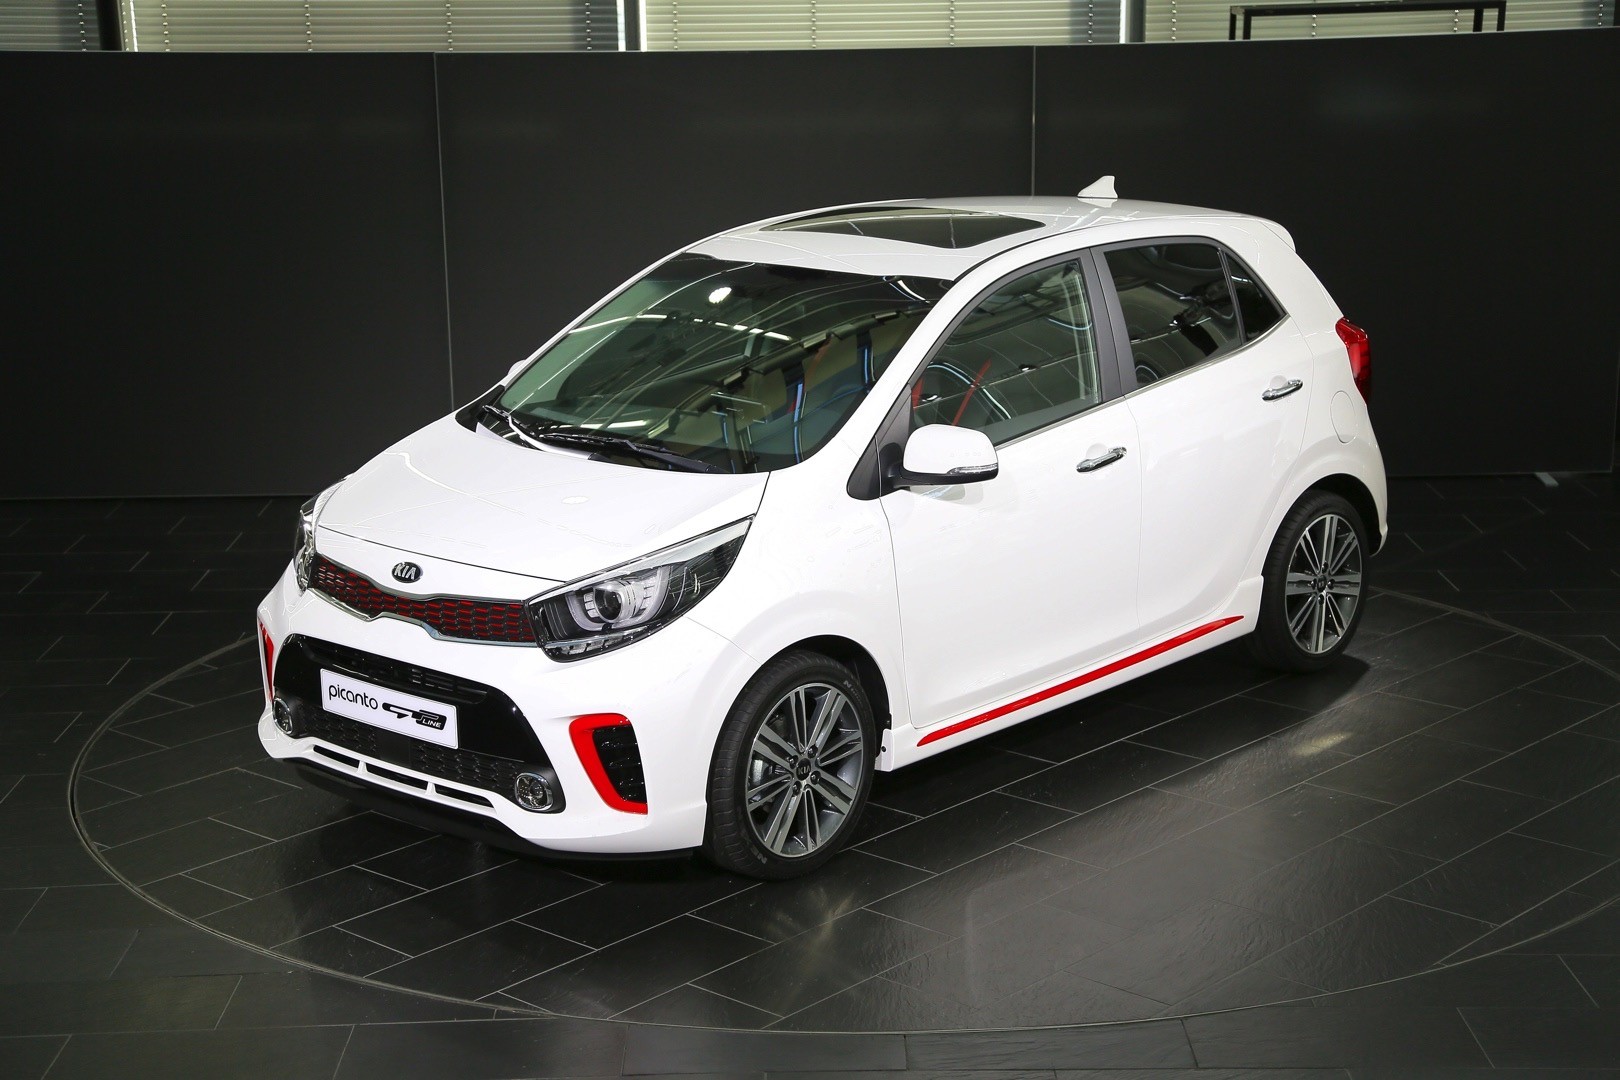 Kia Picanto GT Line With 1 Liter Turbo Is an Up GTI 